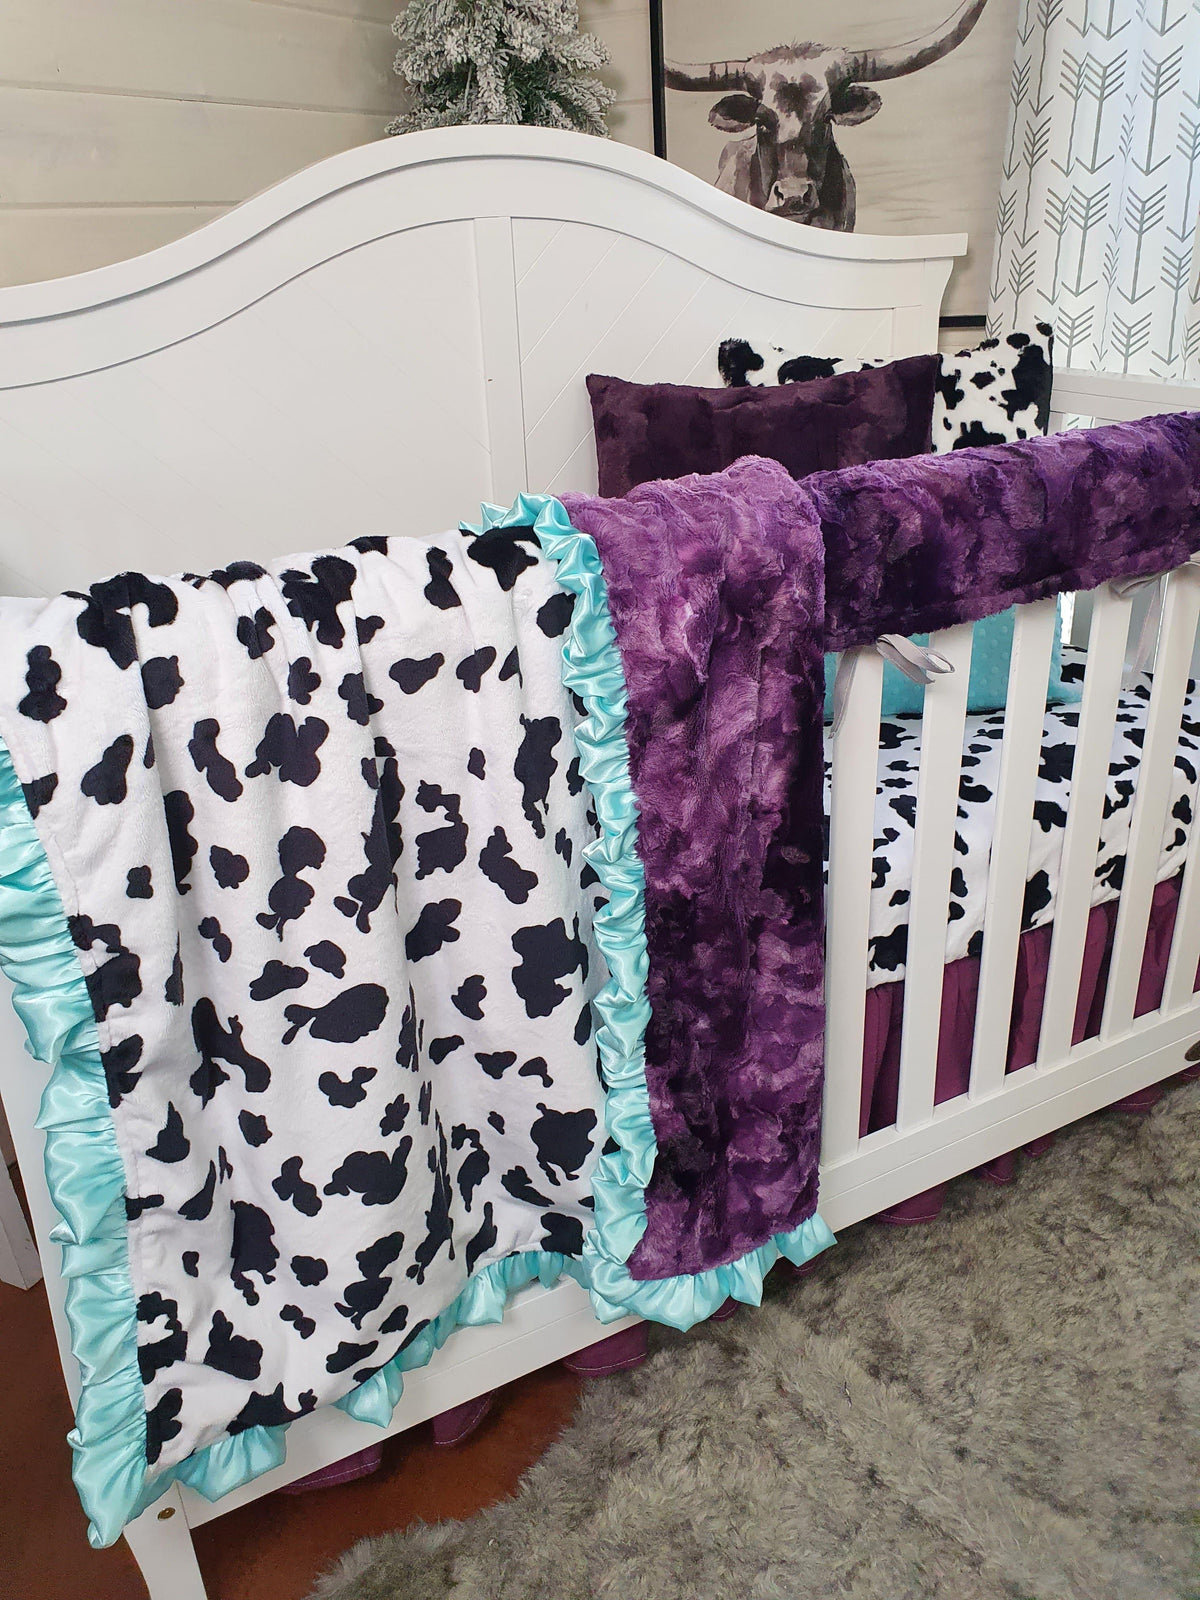 New Release Girl Crib Bedding- Black White Cow Minky Baby Bedding &amp; Nursery Collection - DBC Baby Bedding Co 